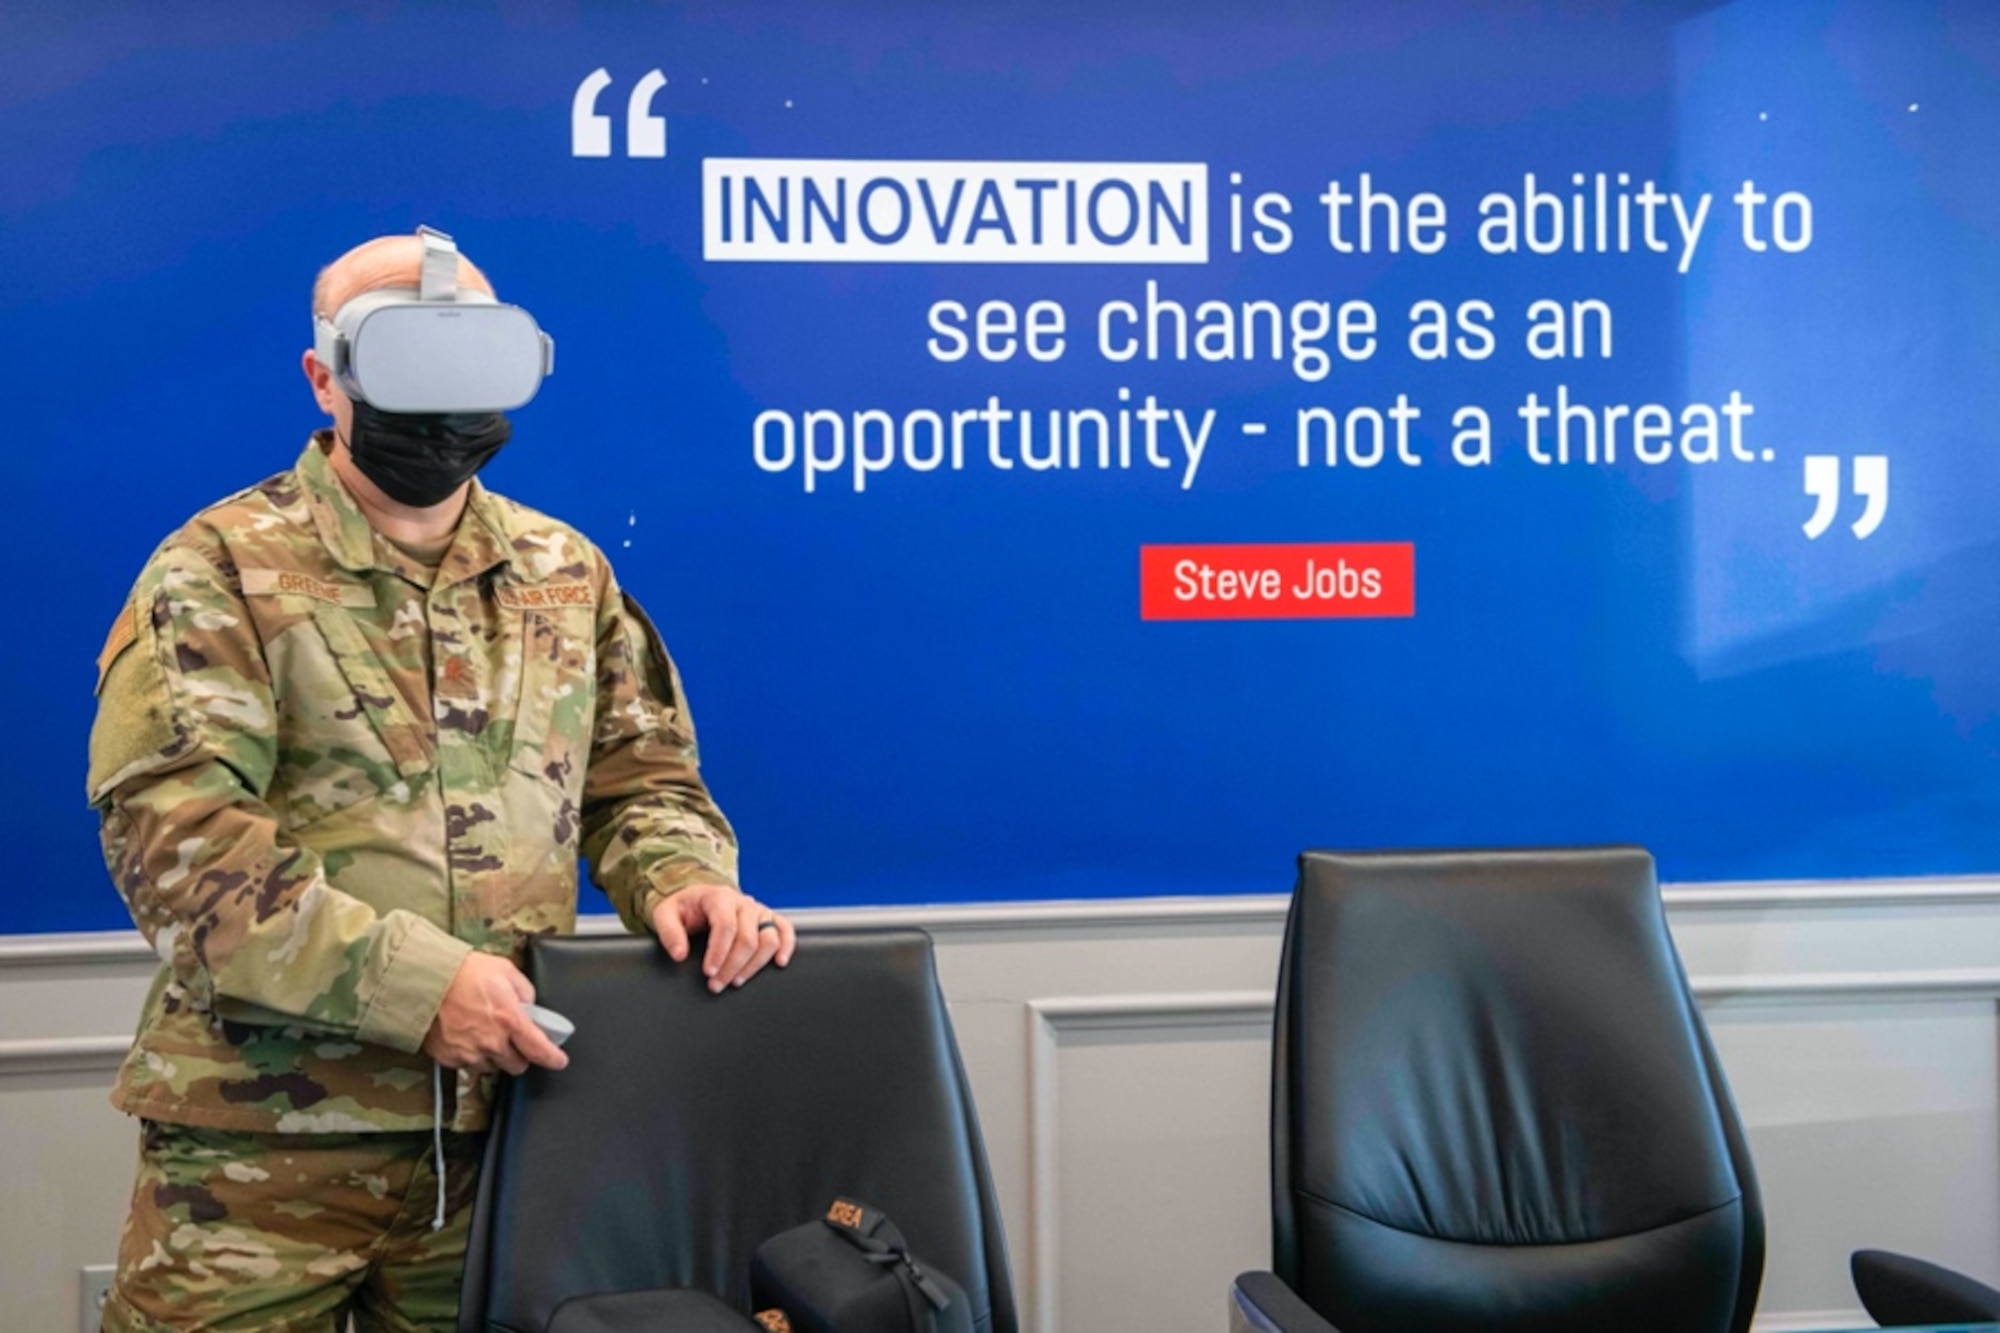 Chaplain (Maj.) Robert Greene, instructor at Air Force Chaplain Corps College at Air University prepares a virtual reality experience at the AR/VR iExpo in Montgomery, Alabama, Nov. 9, 2021. At the expo, local civic leaders and community members experienced how Air University and MGMWERX use cutting-edge technology to enhance training and education by providing a glimpse into realistic situations people may have to face during their careers. (U.S. Air Force photo by Staff Sgt. Lauren Silverthorne)